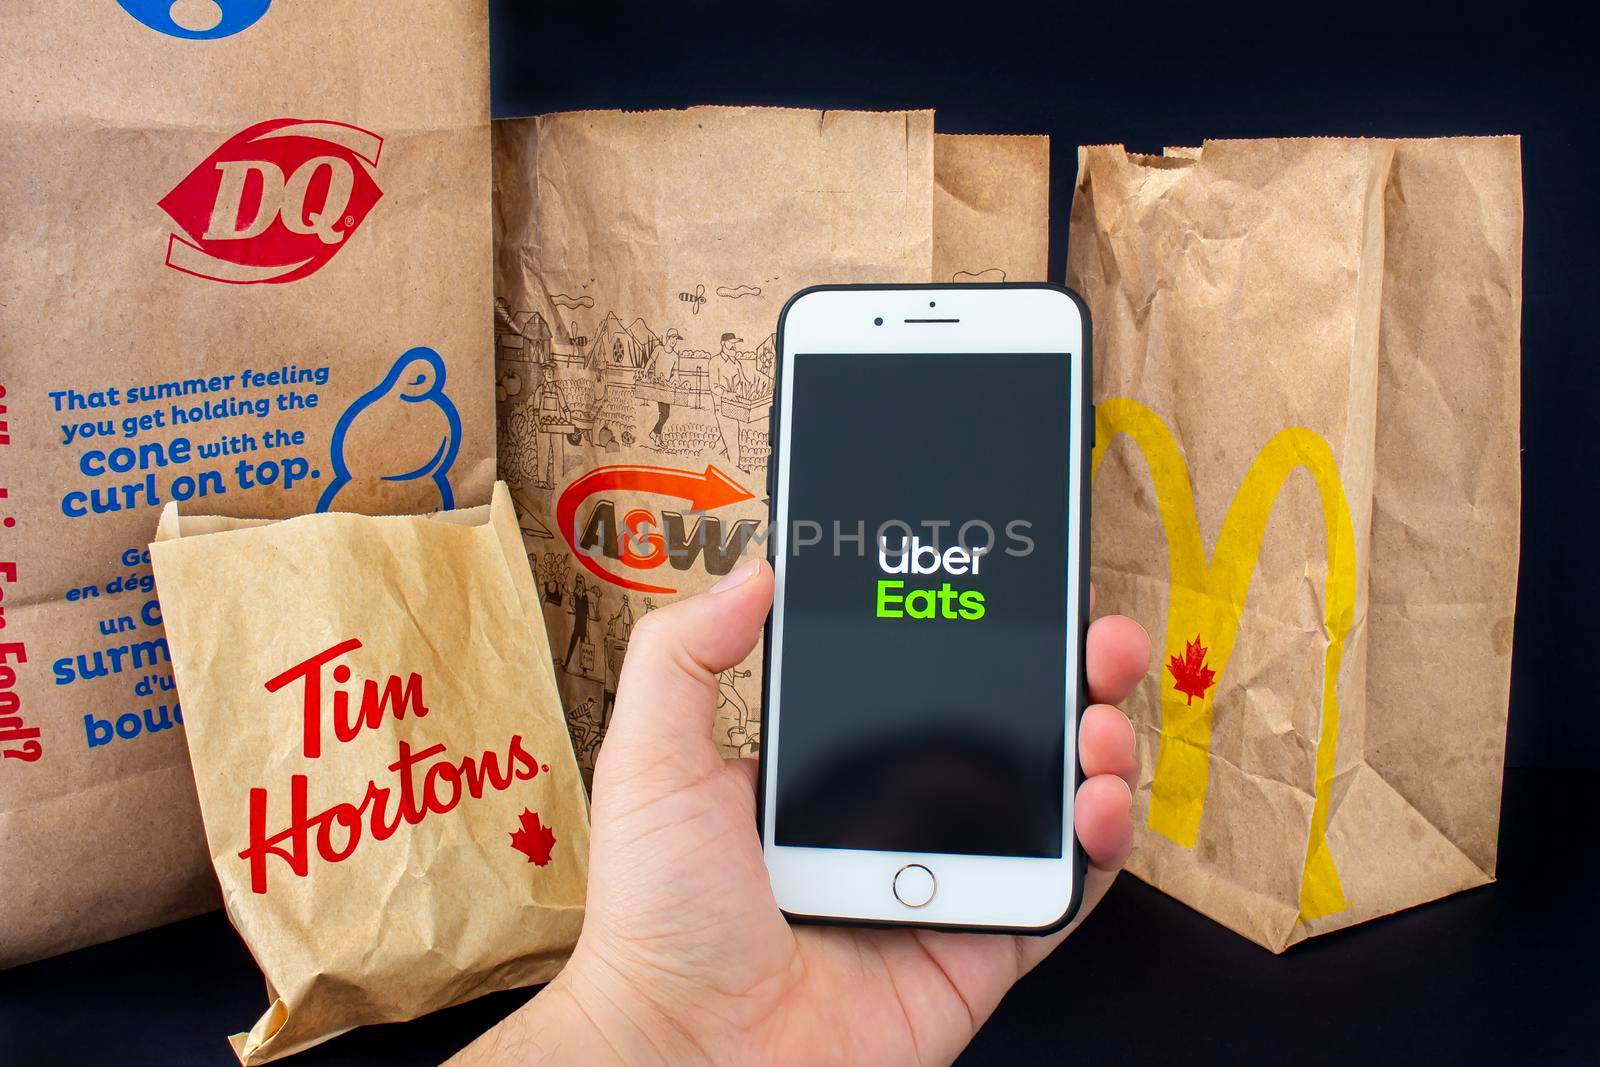 Calgary, Alberta. Canada. April 24, 2020: A person holding an iPhone Plus with the Uber Eats application open with delivered food bags from Tim Hourtons, A&W, McDonals and DQ by oasisamuel